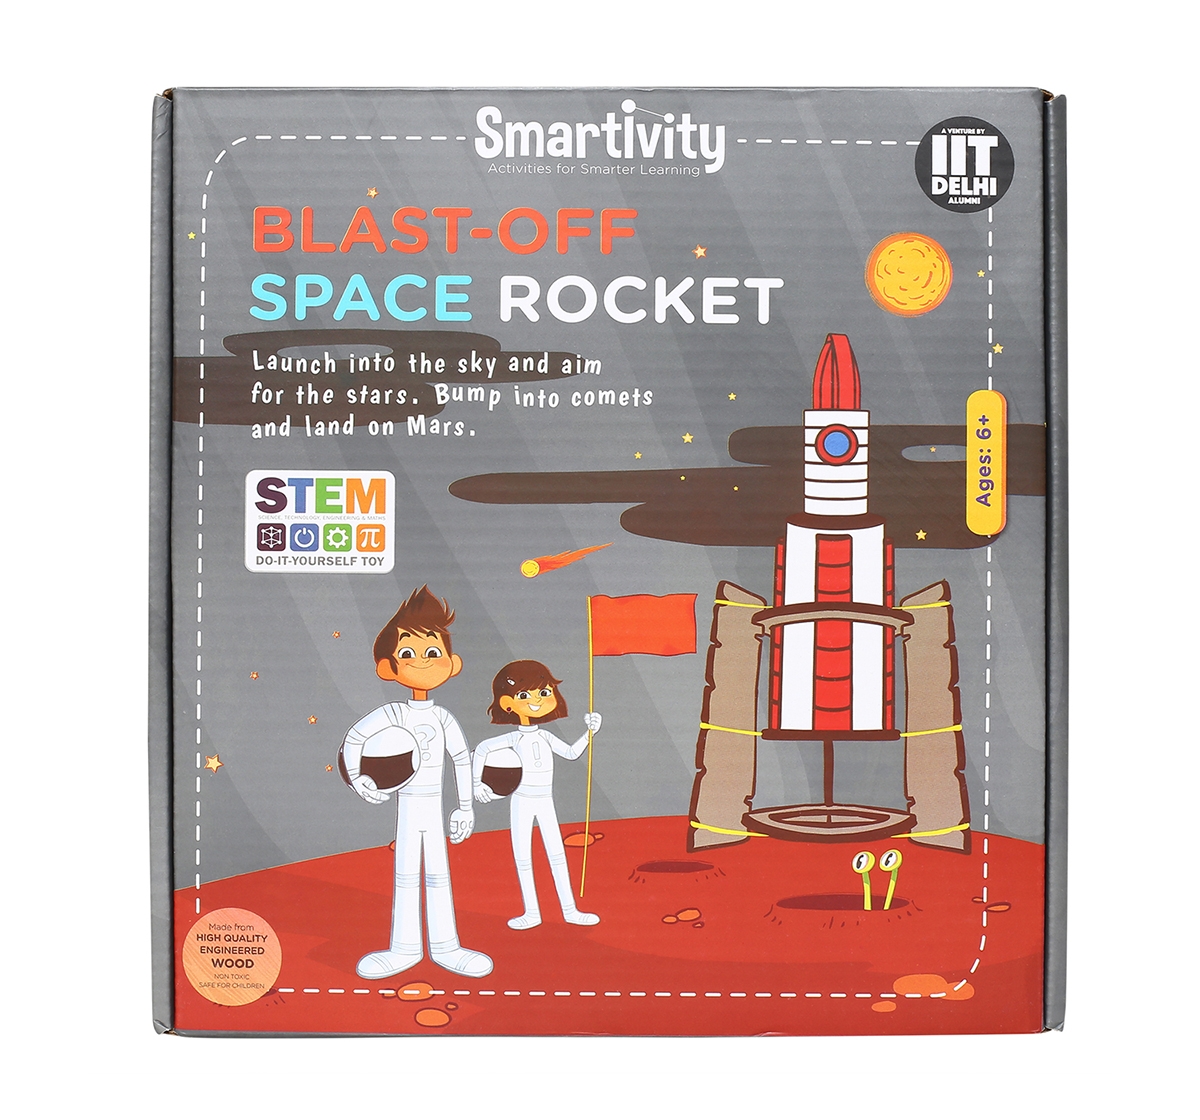 Smartivity | Smartivity Space Rocket Blast-off Action STEM Toy, Educational & Construction based DIY Fun Activity Game for Kids 6 to 14, Gifts for Boys & Girls, Learn Science Engineering Project, Made in India 0